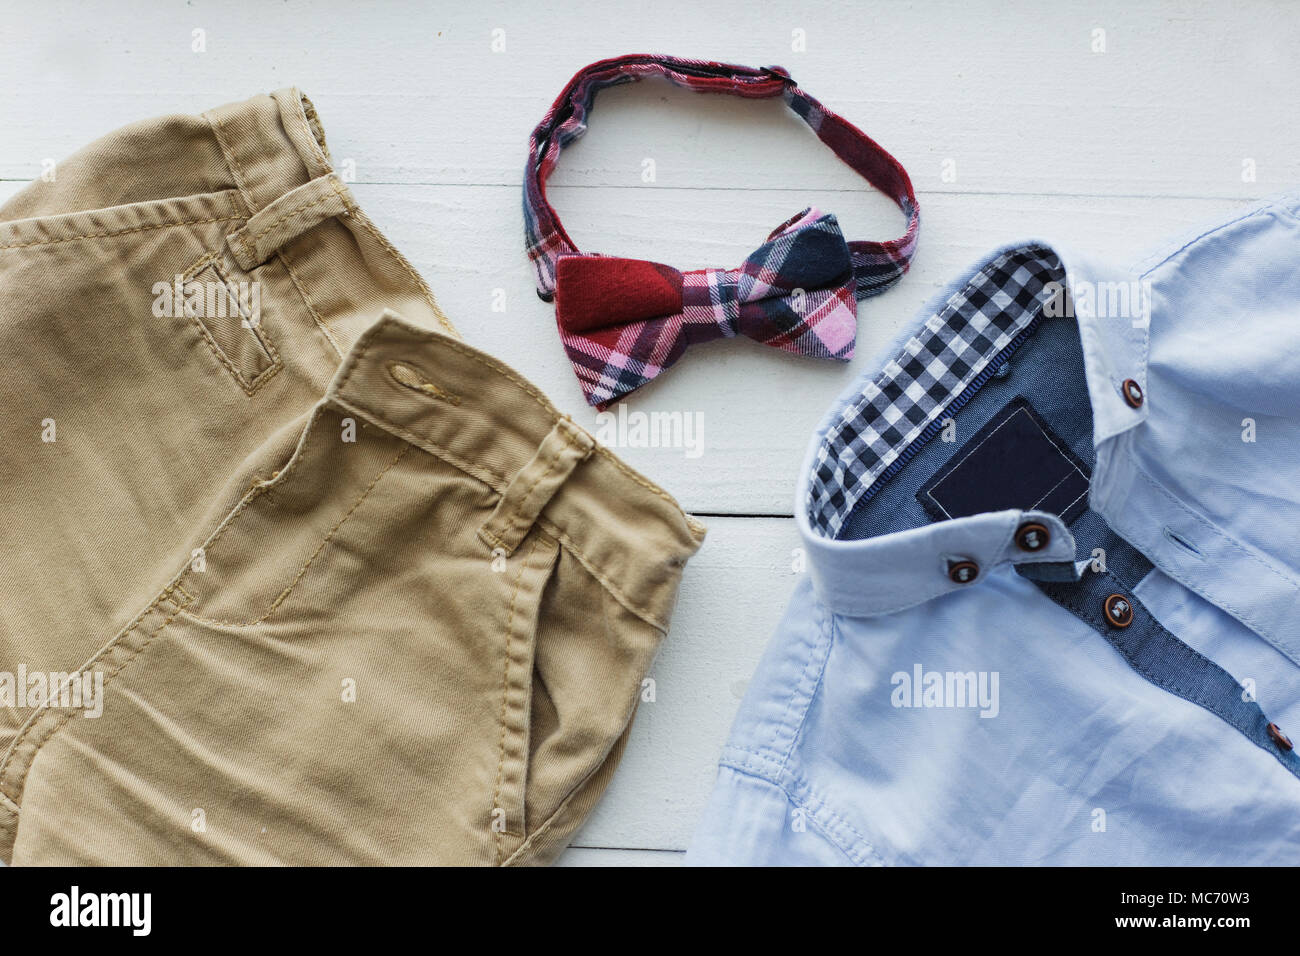 Shop Men's Chinos, Denim, & Casual Pants | Brooks Brothers